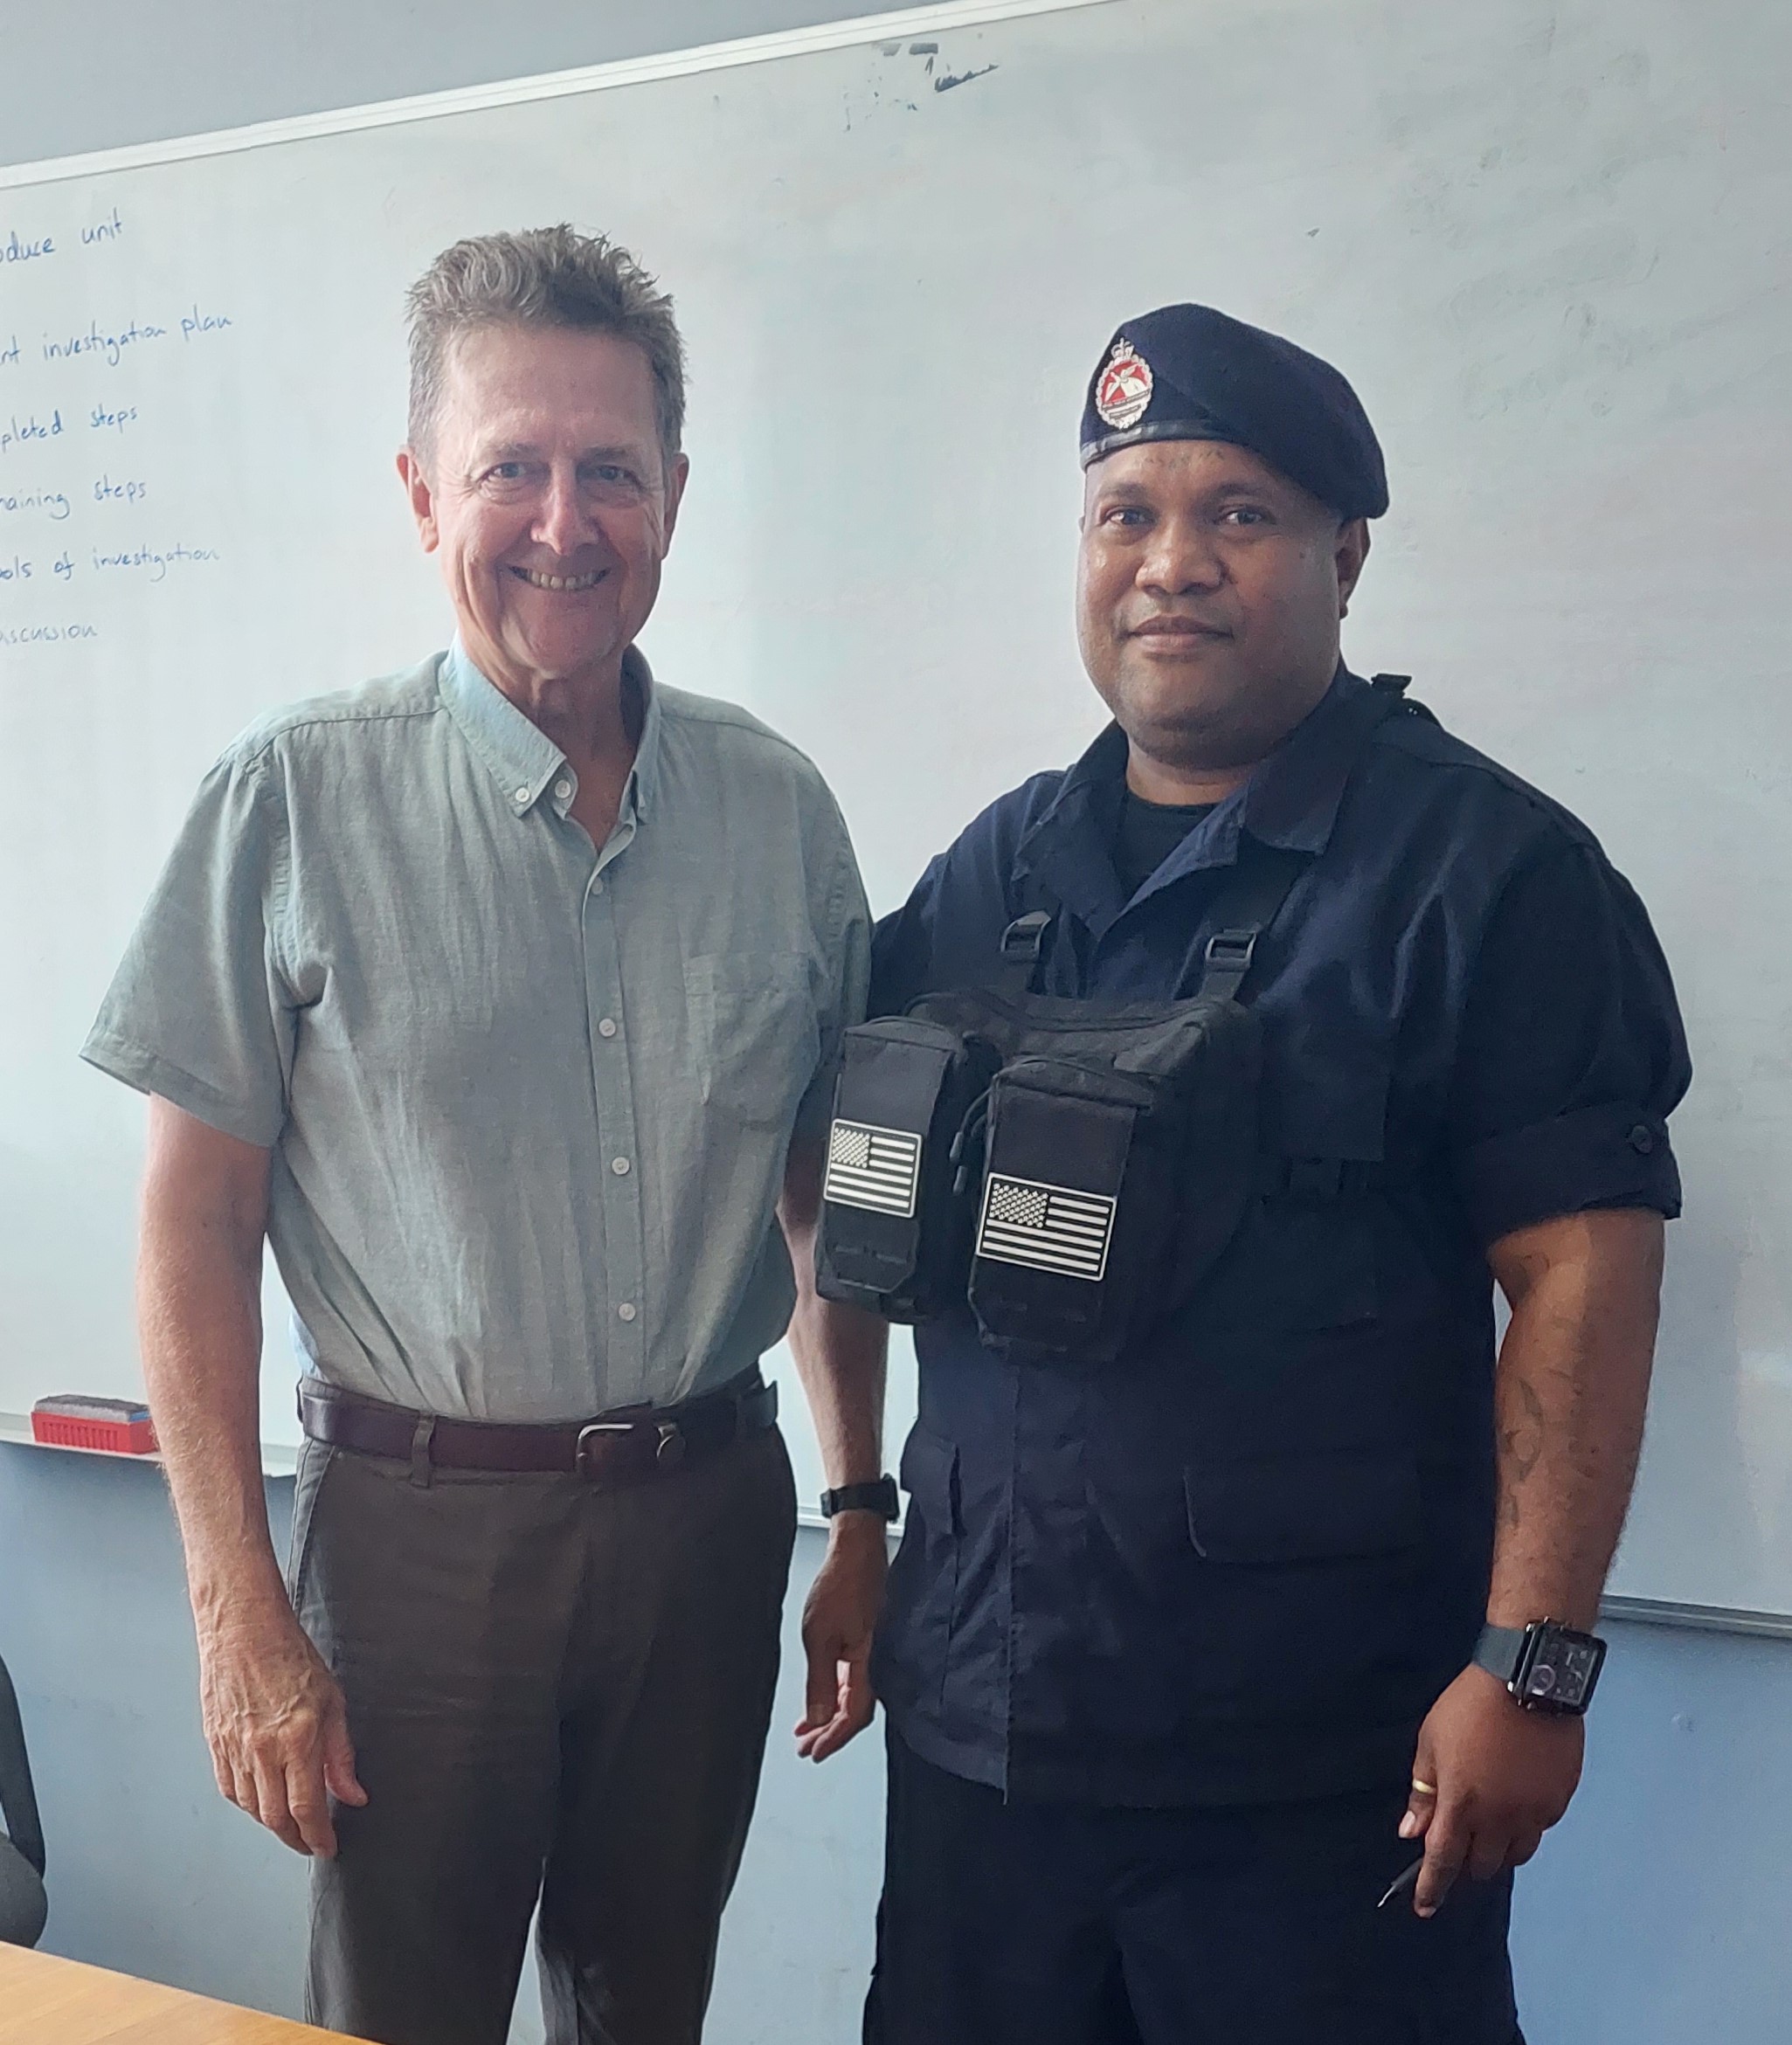 Warren Crighton UNODC and Leonard Wai NFACD during UNODC training in Port Moresby 17 July 2023